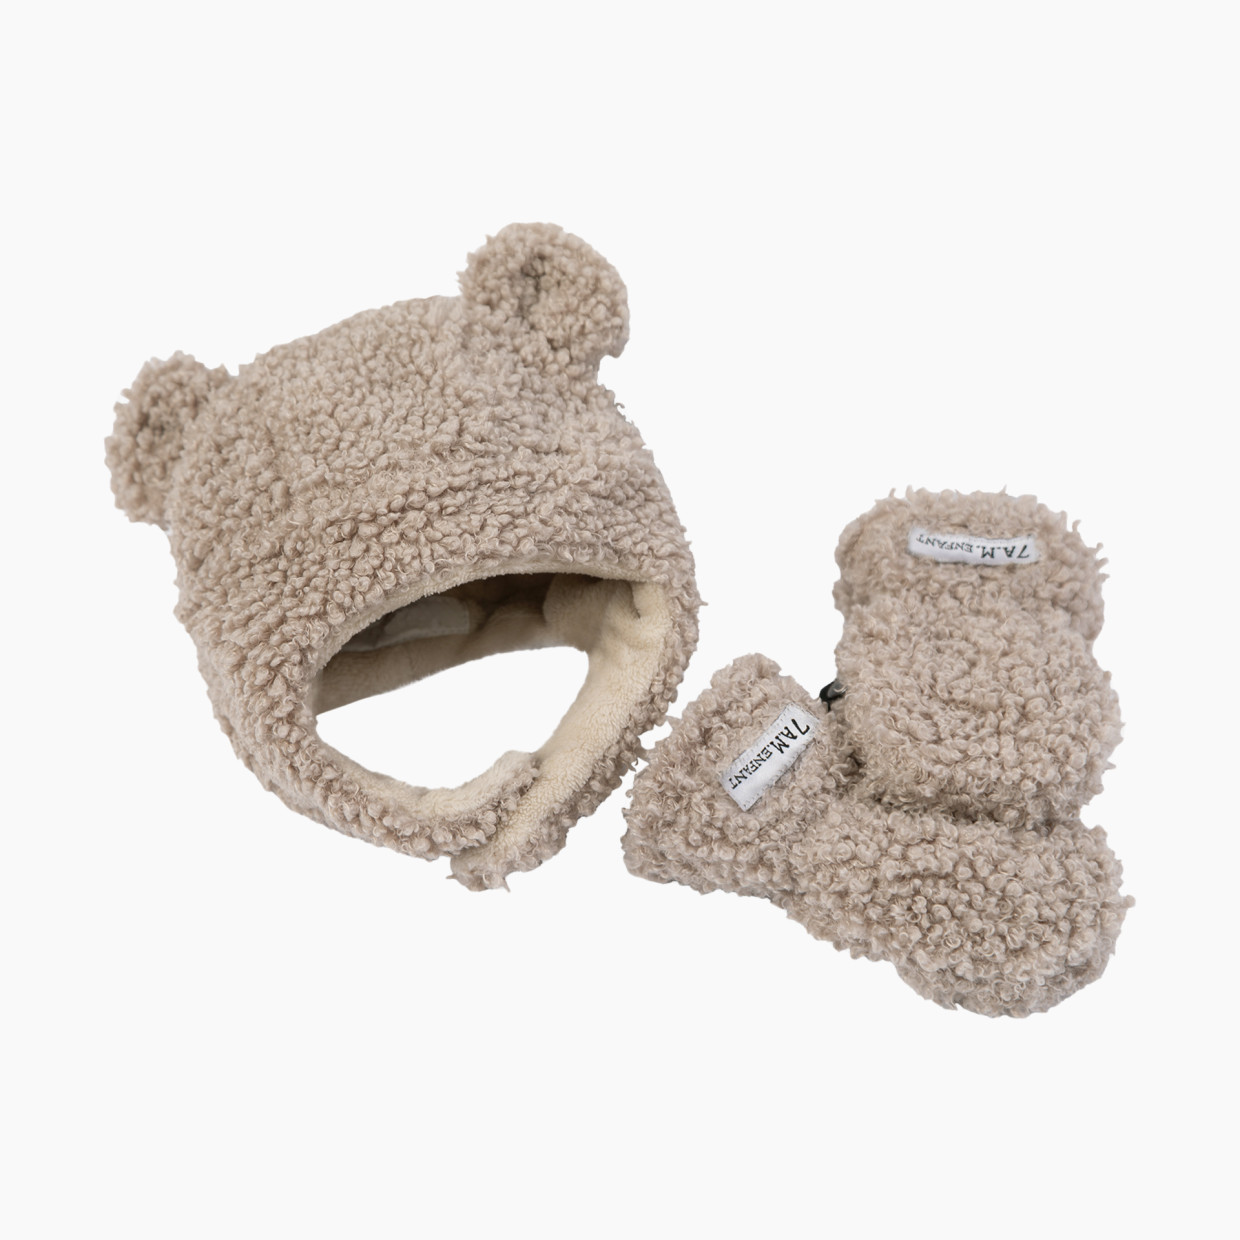 7AM Enfant Teddy Hat and Mittens Set - Oatmeal, 6-12 M.